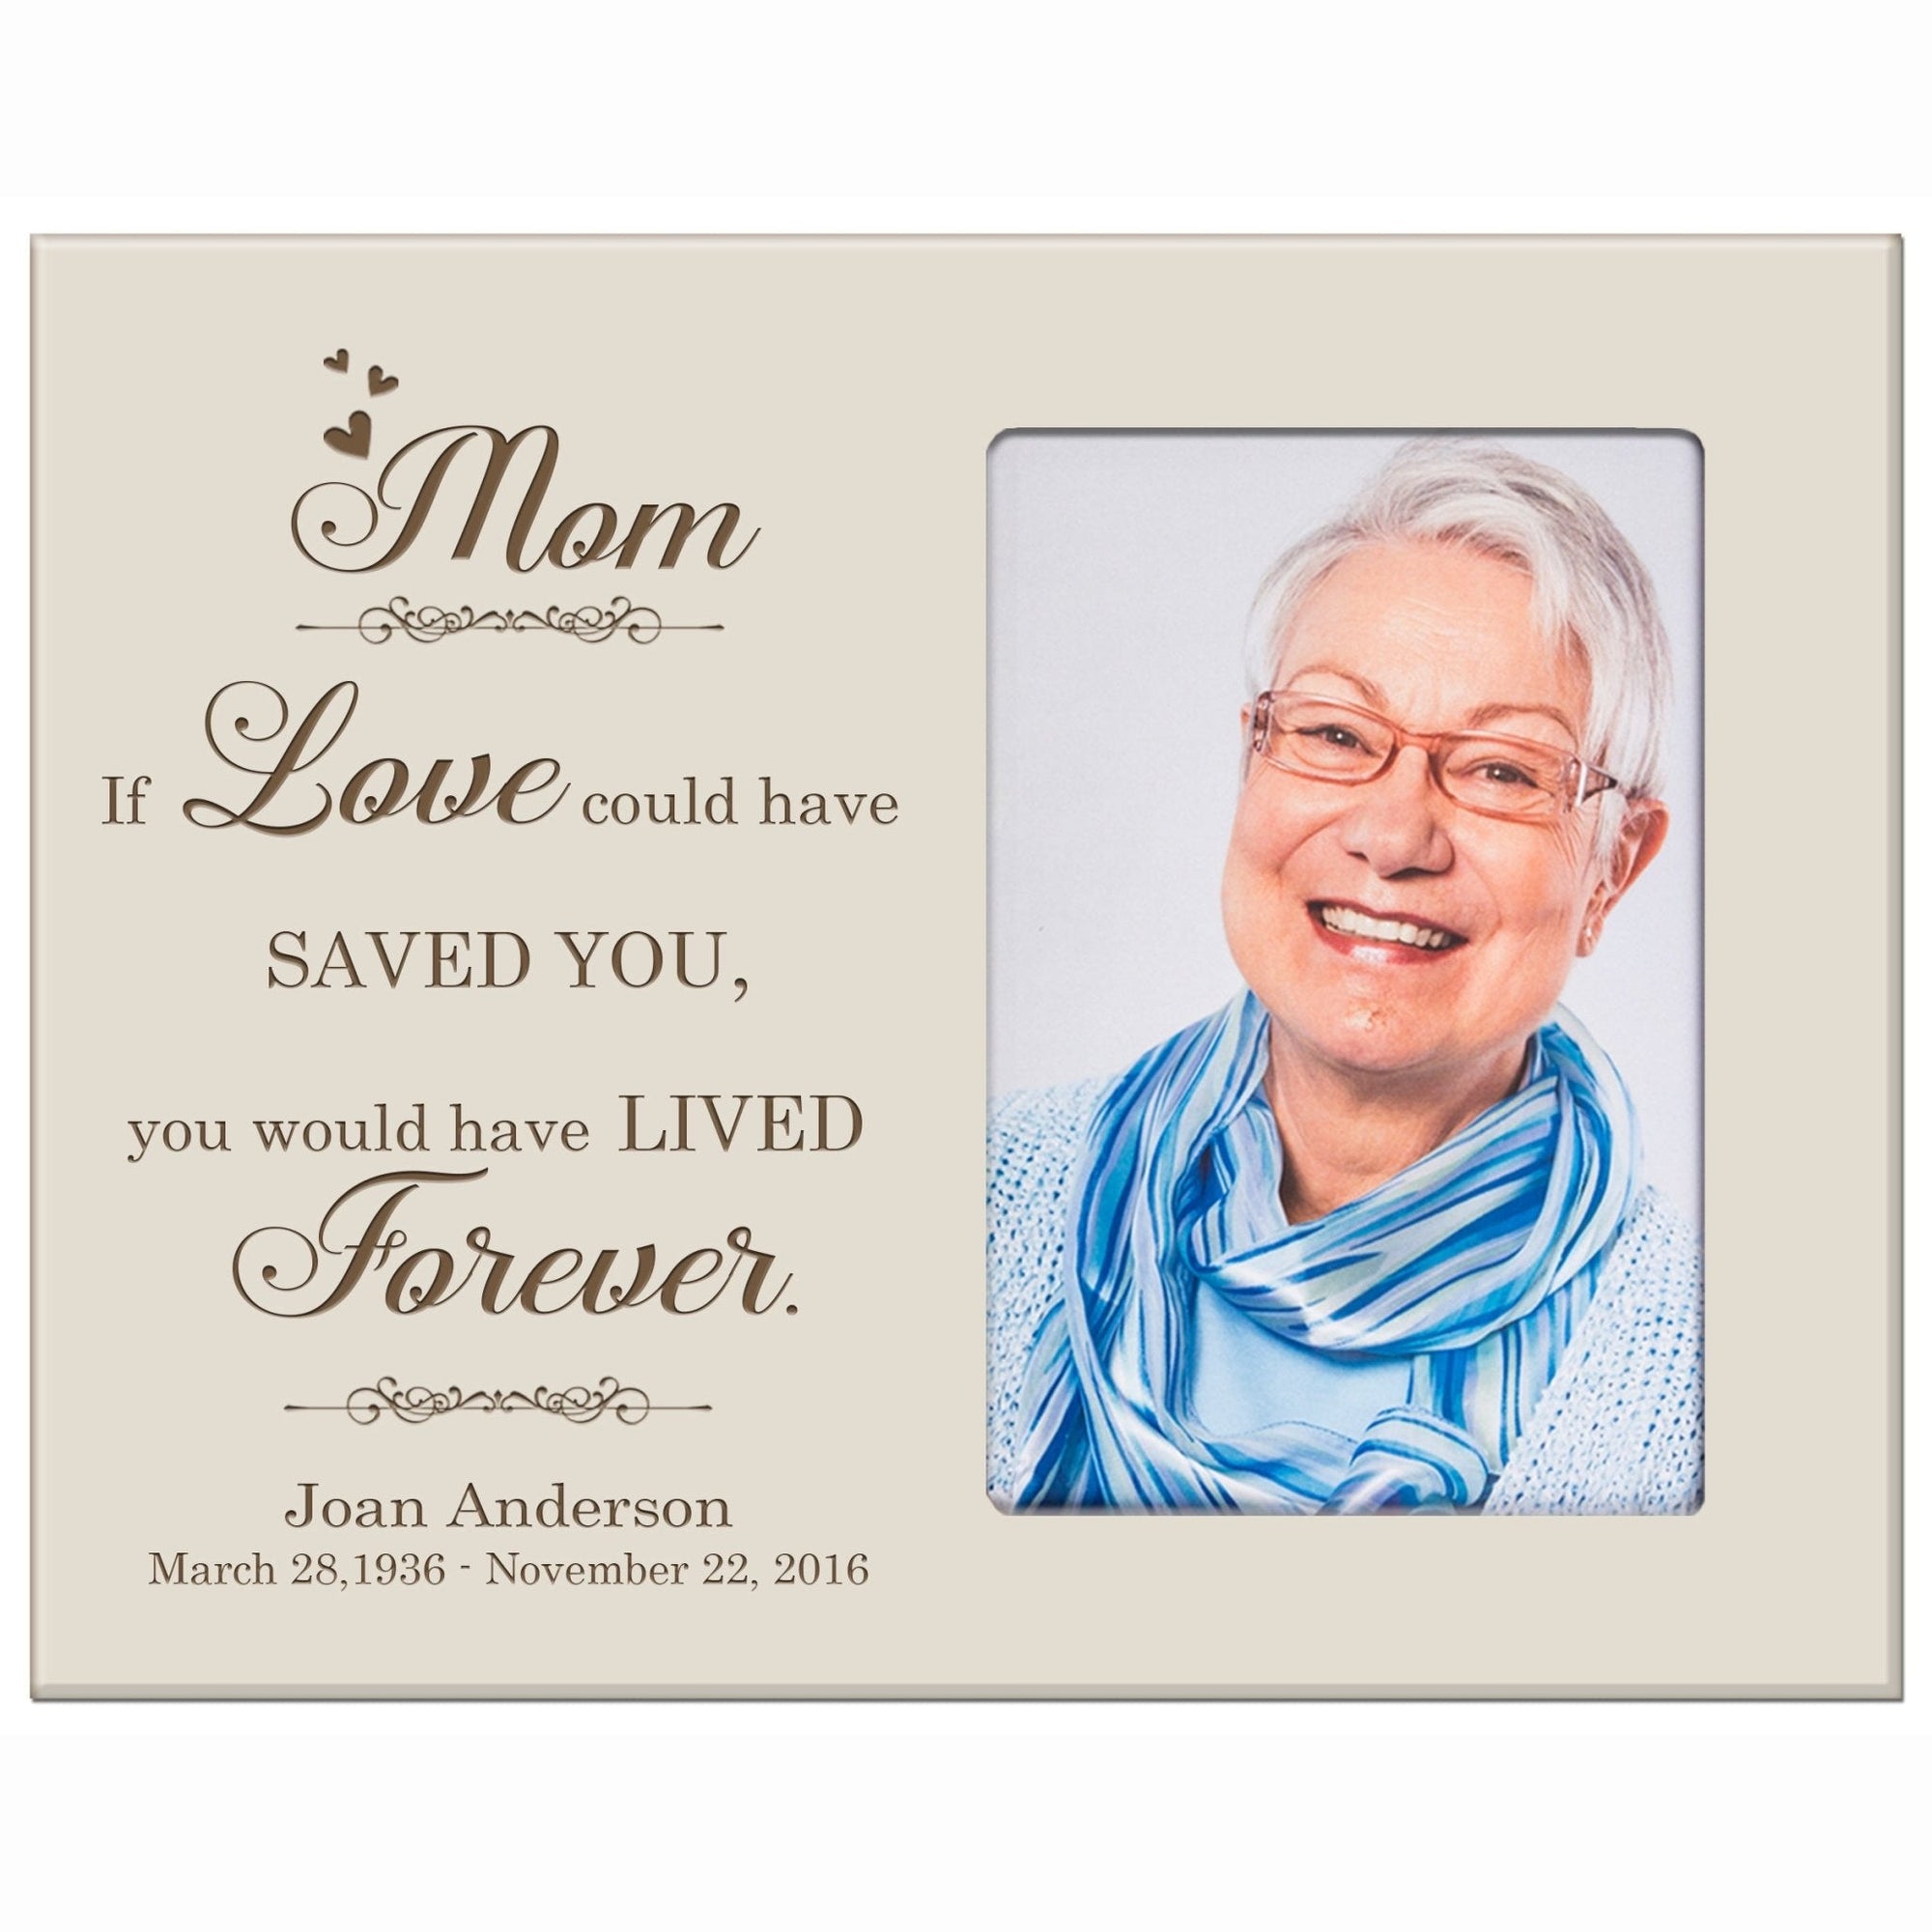 Personalized Horizontal 8x10 Wooden Memorial Picture Frame Holds 4x6 Photo - Mom, If Love Could - LifeSong Milestones